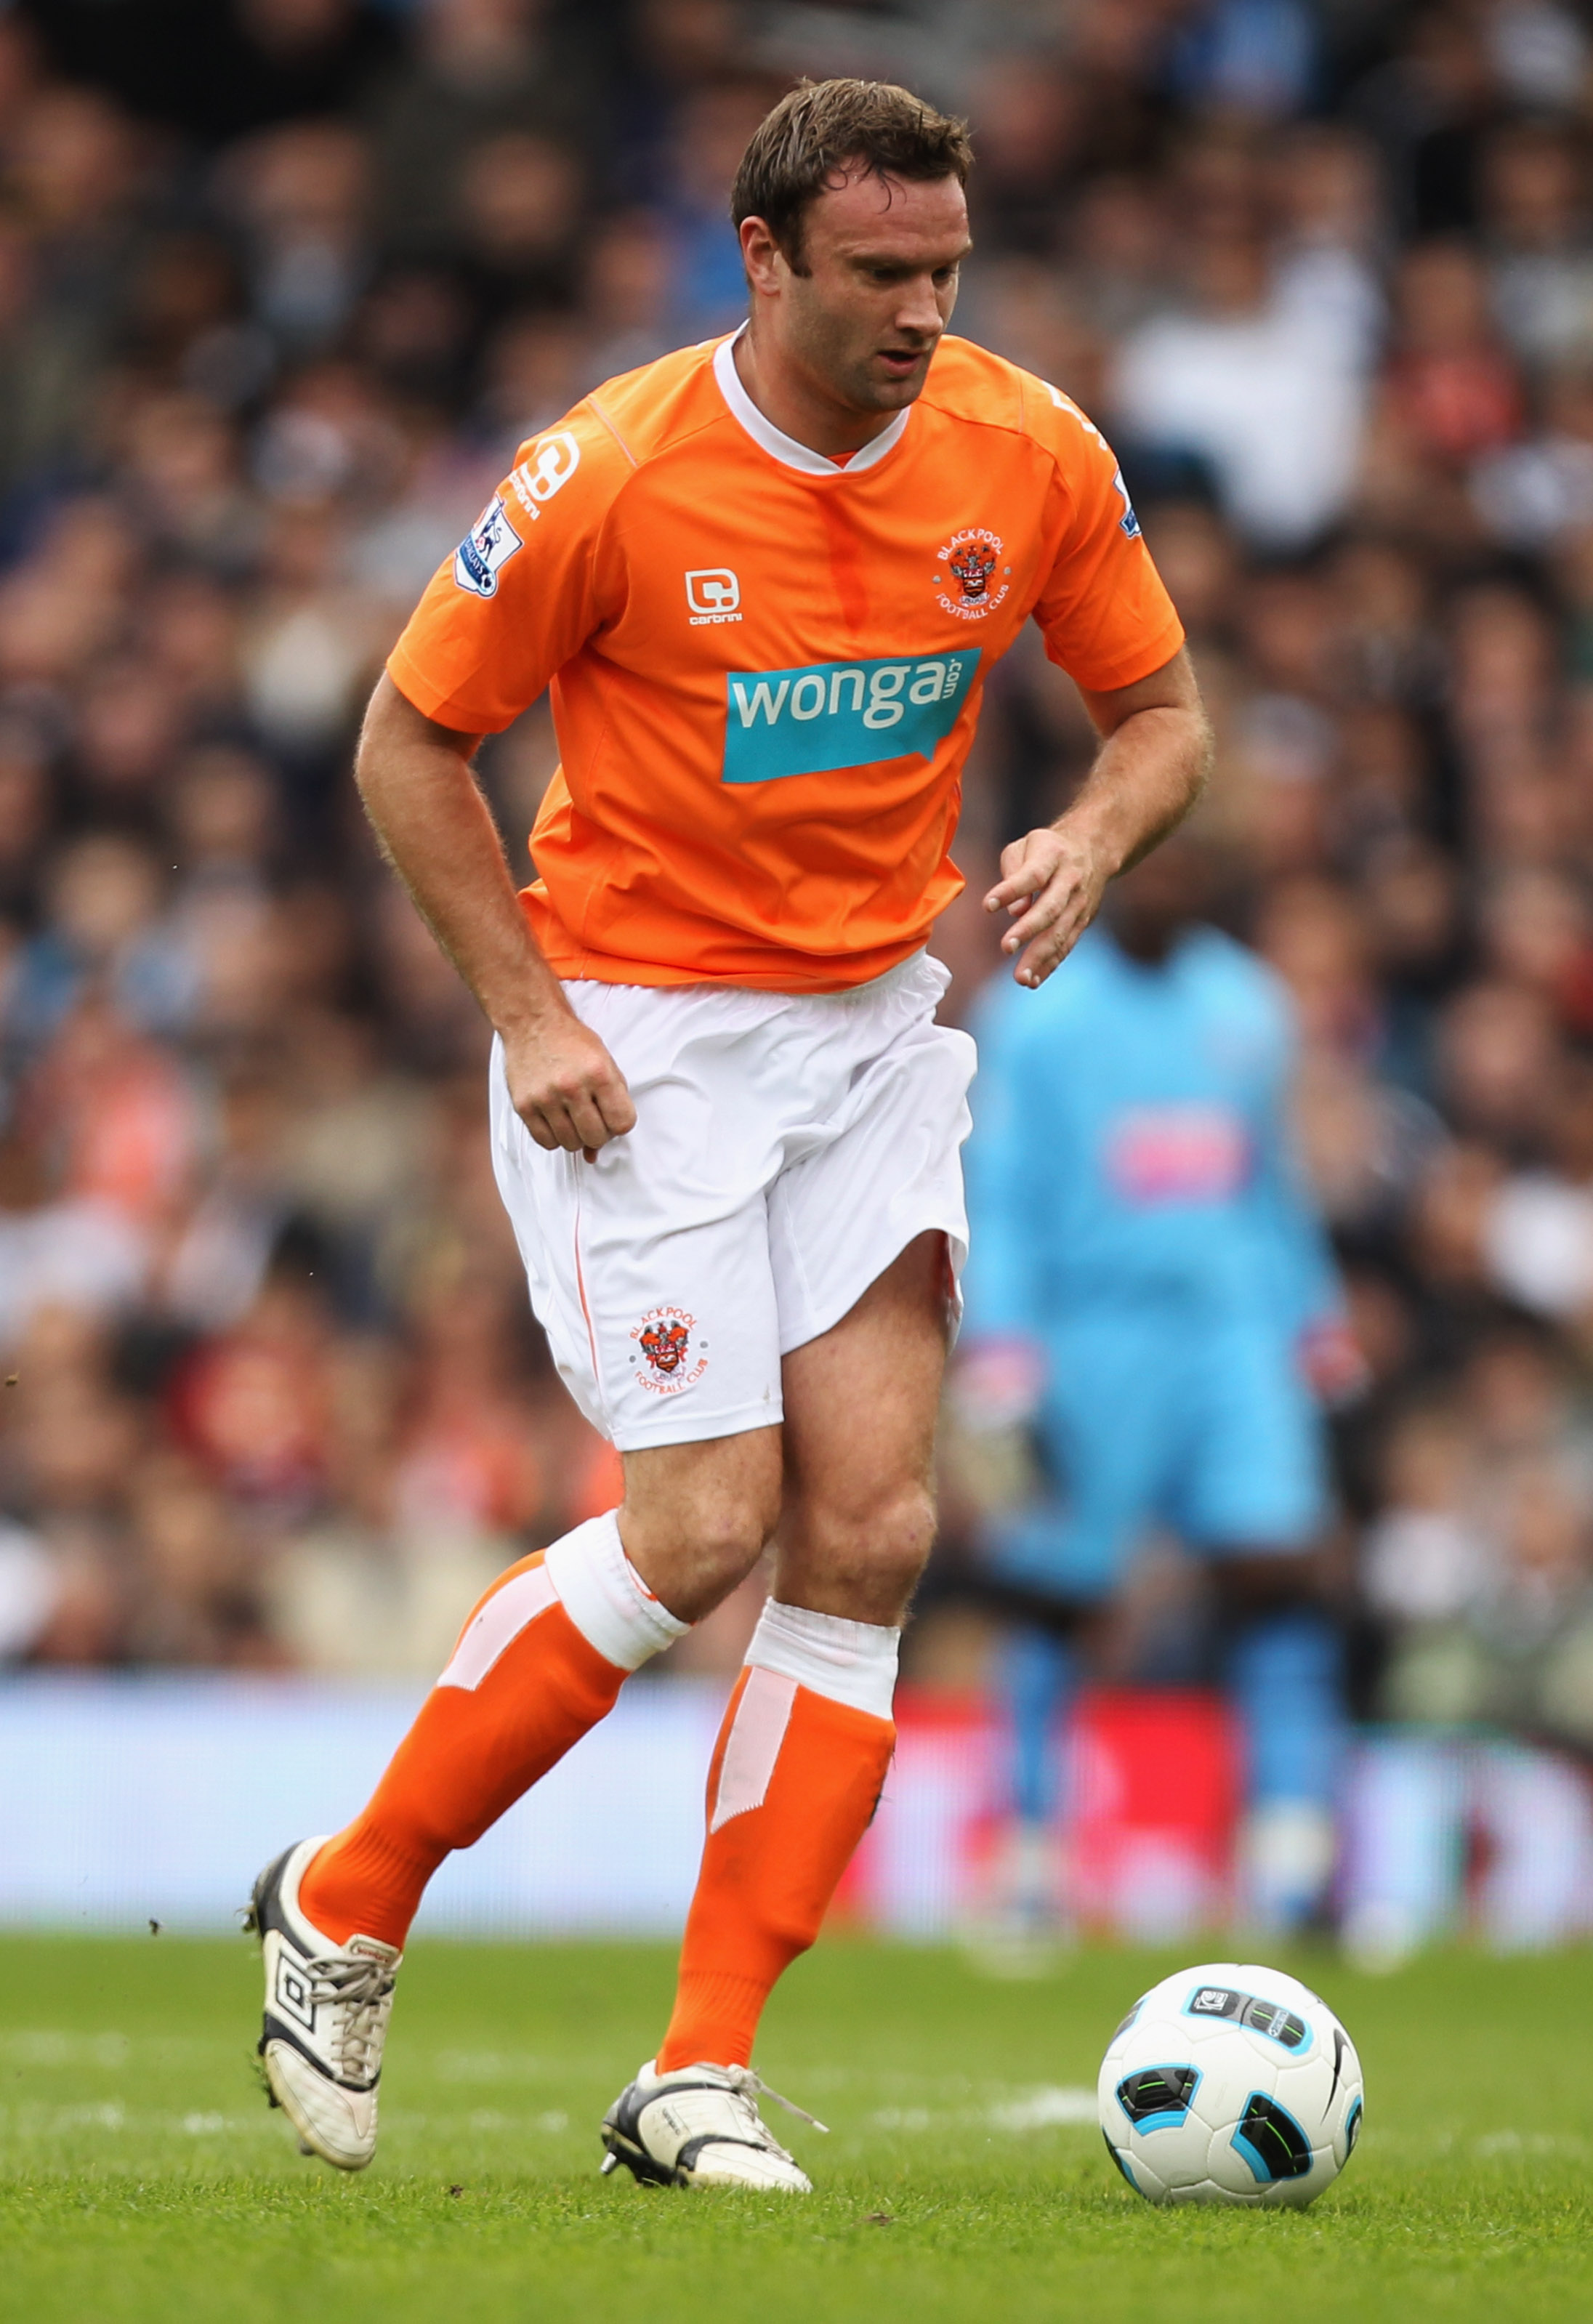 LONDON, ENGLAND - APRIL 03:  Ian Evatt of Blackpool in action during the Barclays Premier League match between Fulham and Blackpool at Craven Cottage on April 3, 2011 in London, England.  (Photo by Ian Walton/Getty Images)